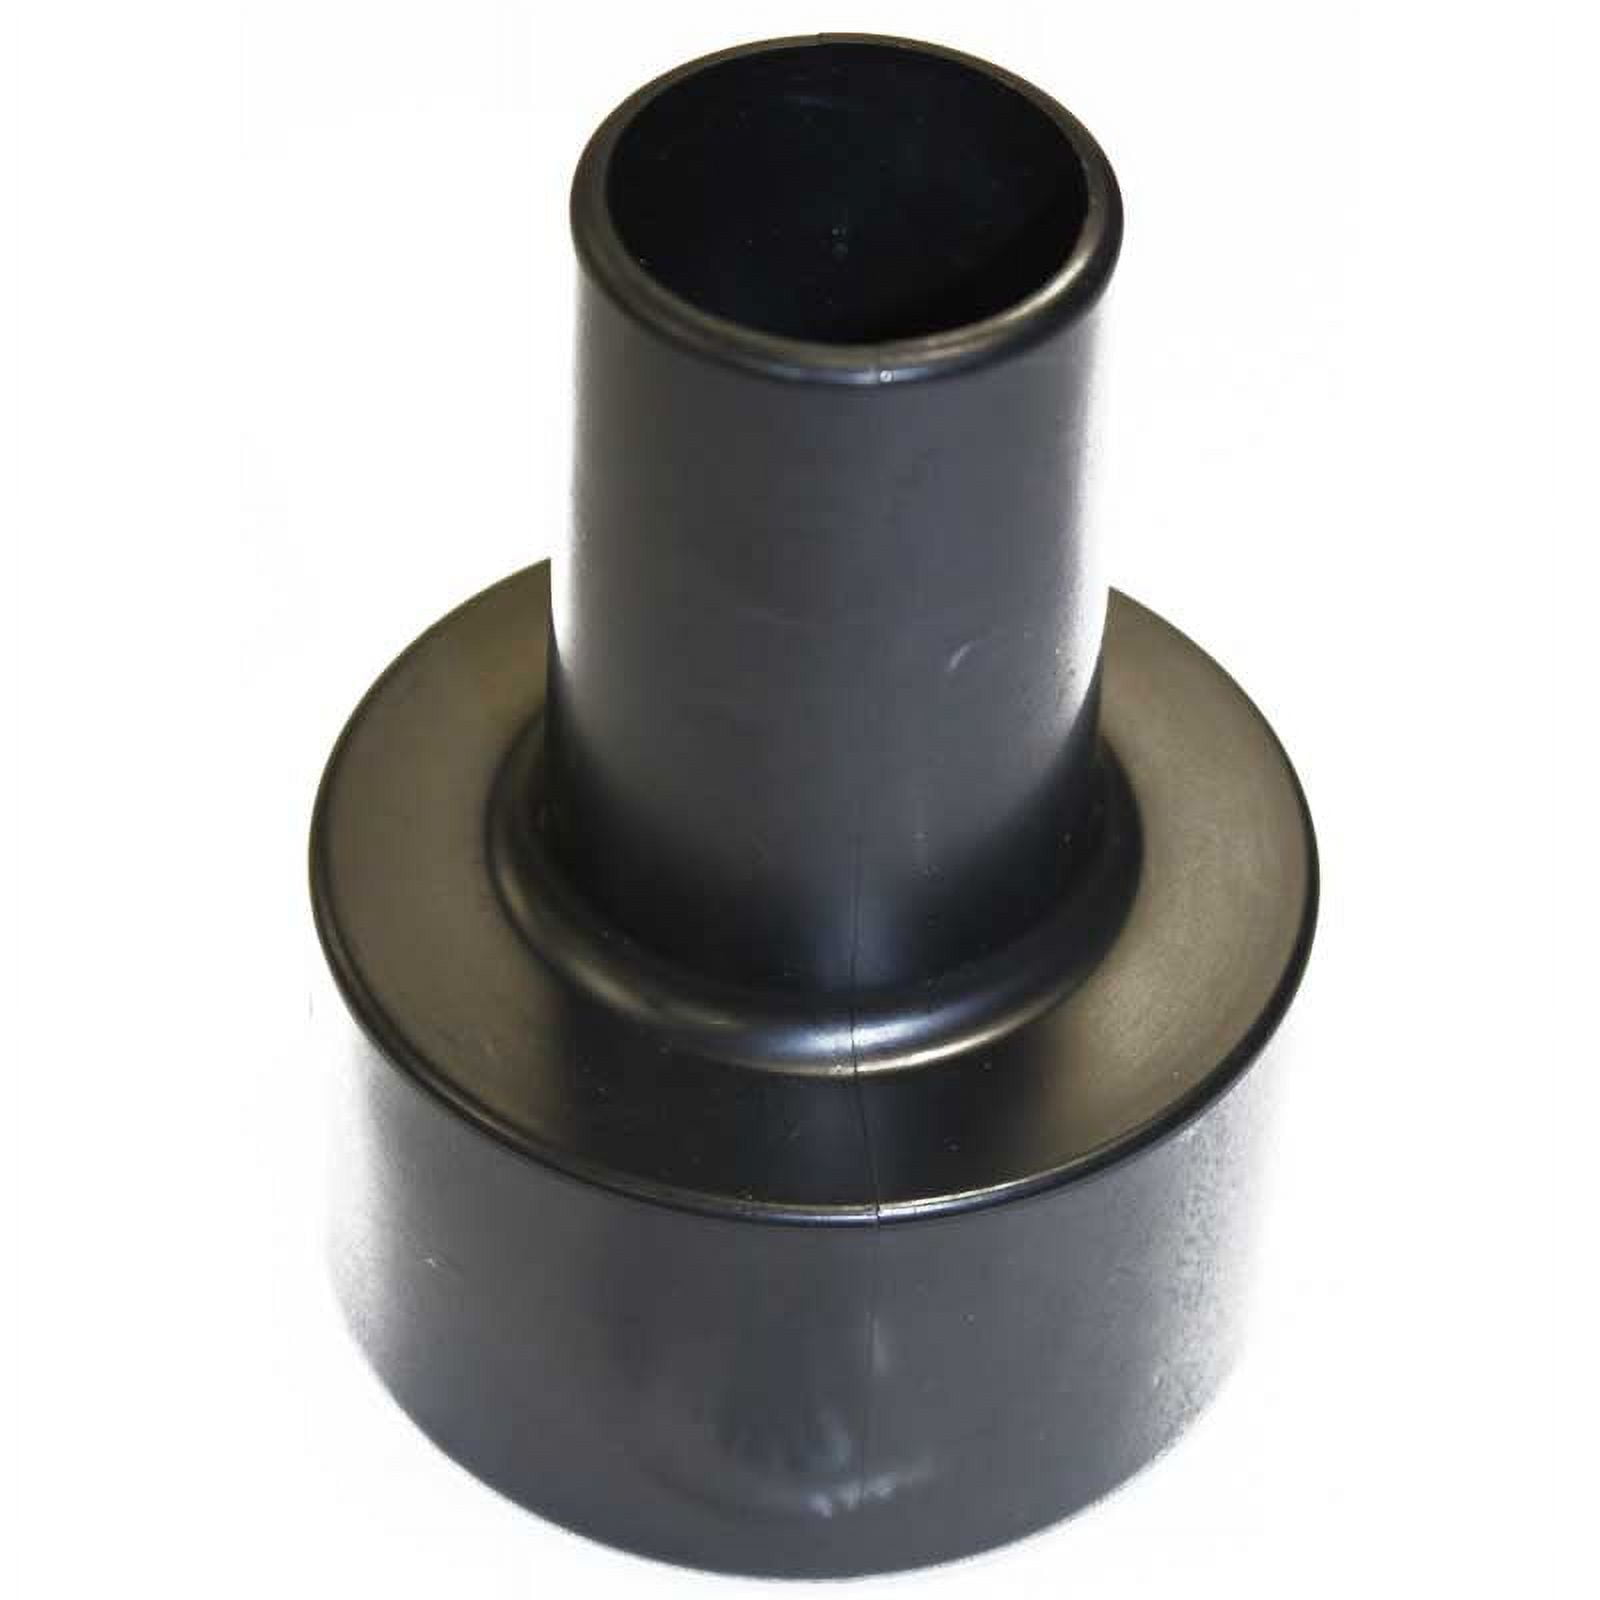 Dust Fitting Adapter for Shop VAC 1-1/4 in to 2-1/4 in Diameter Hose